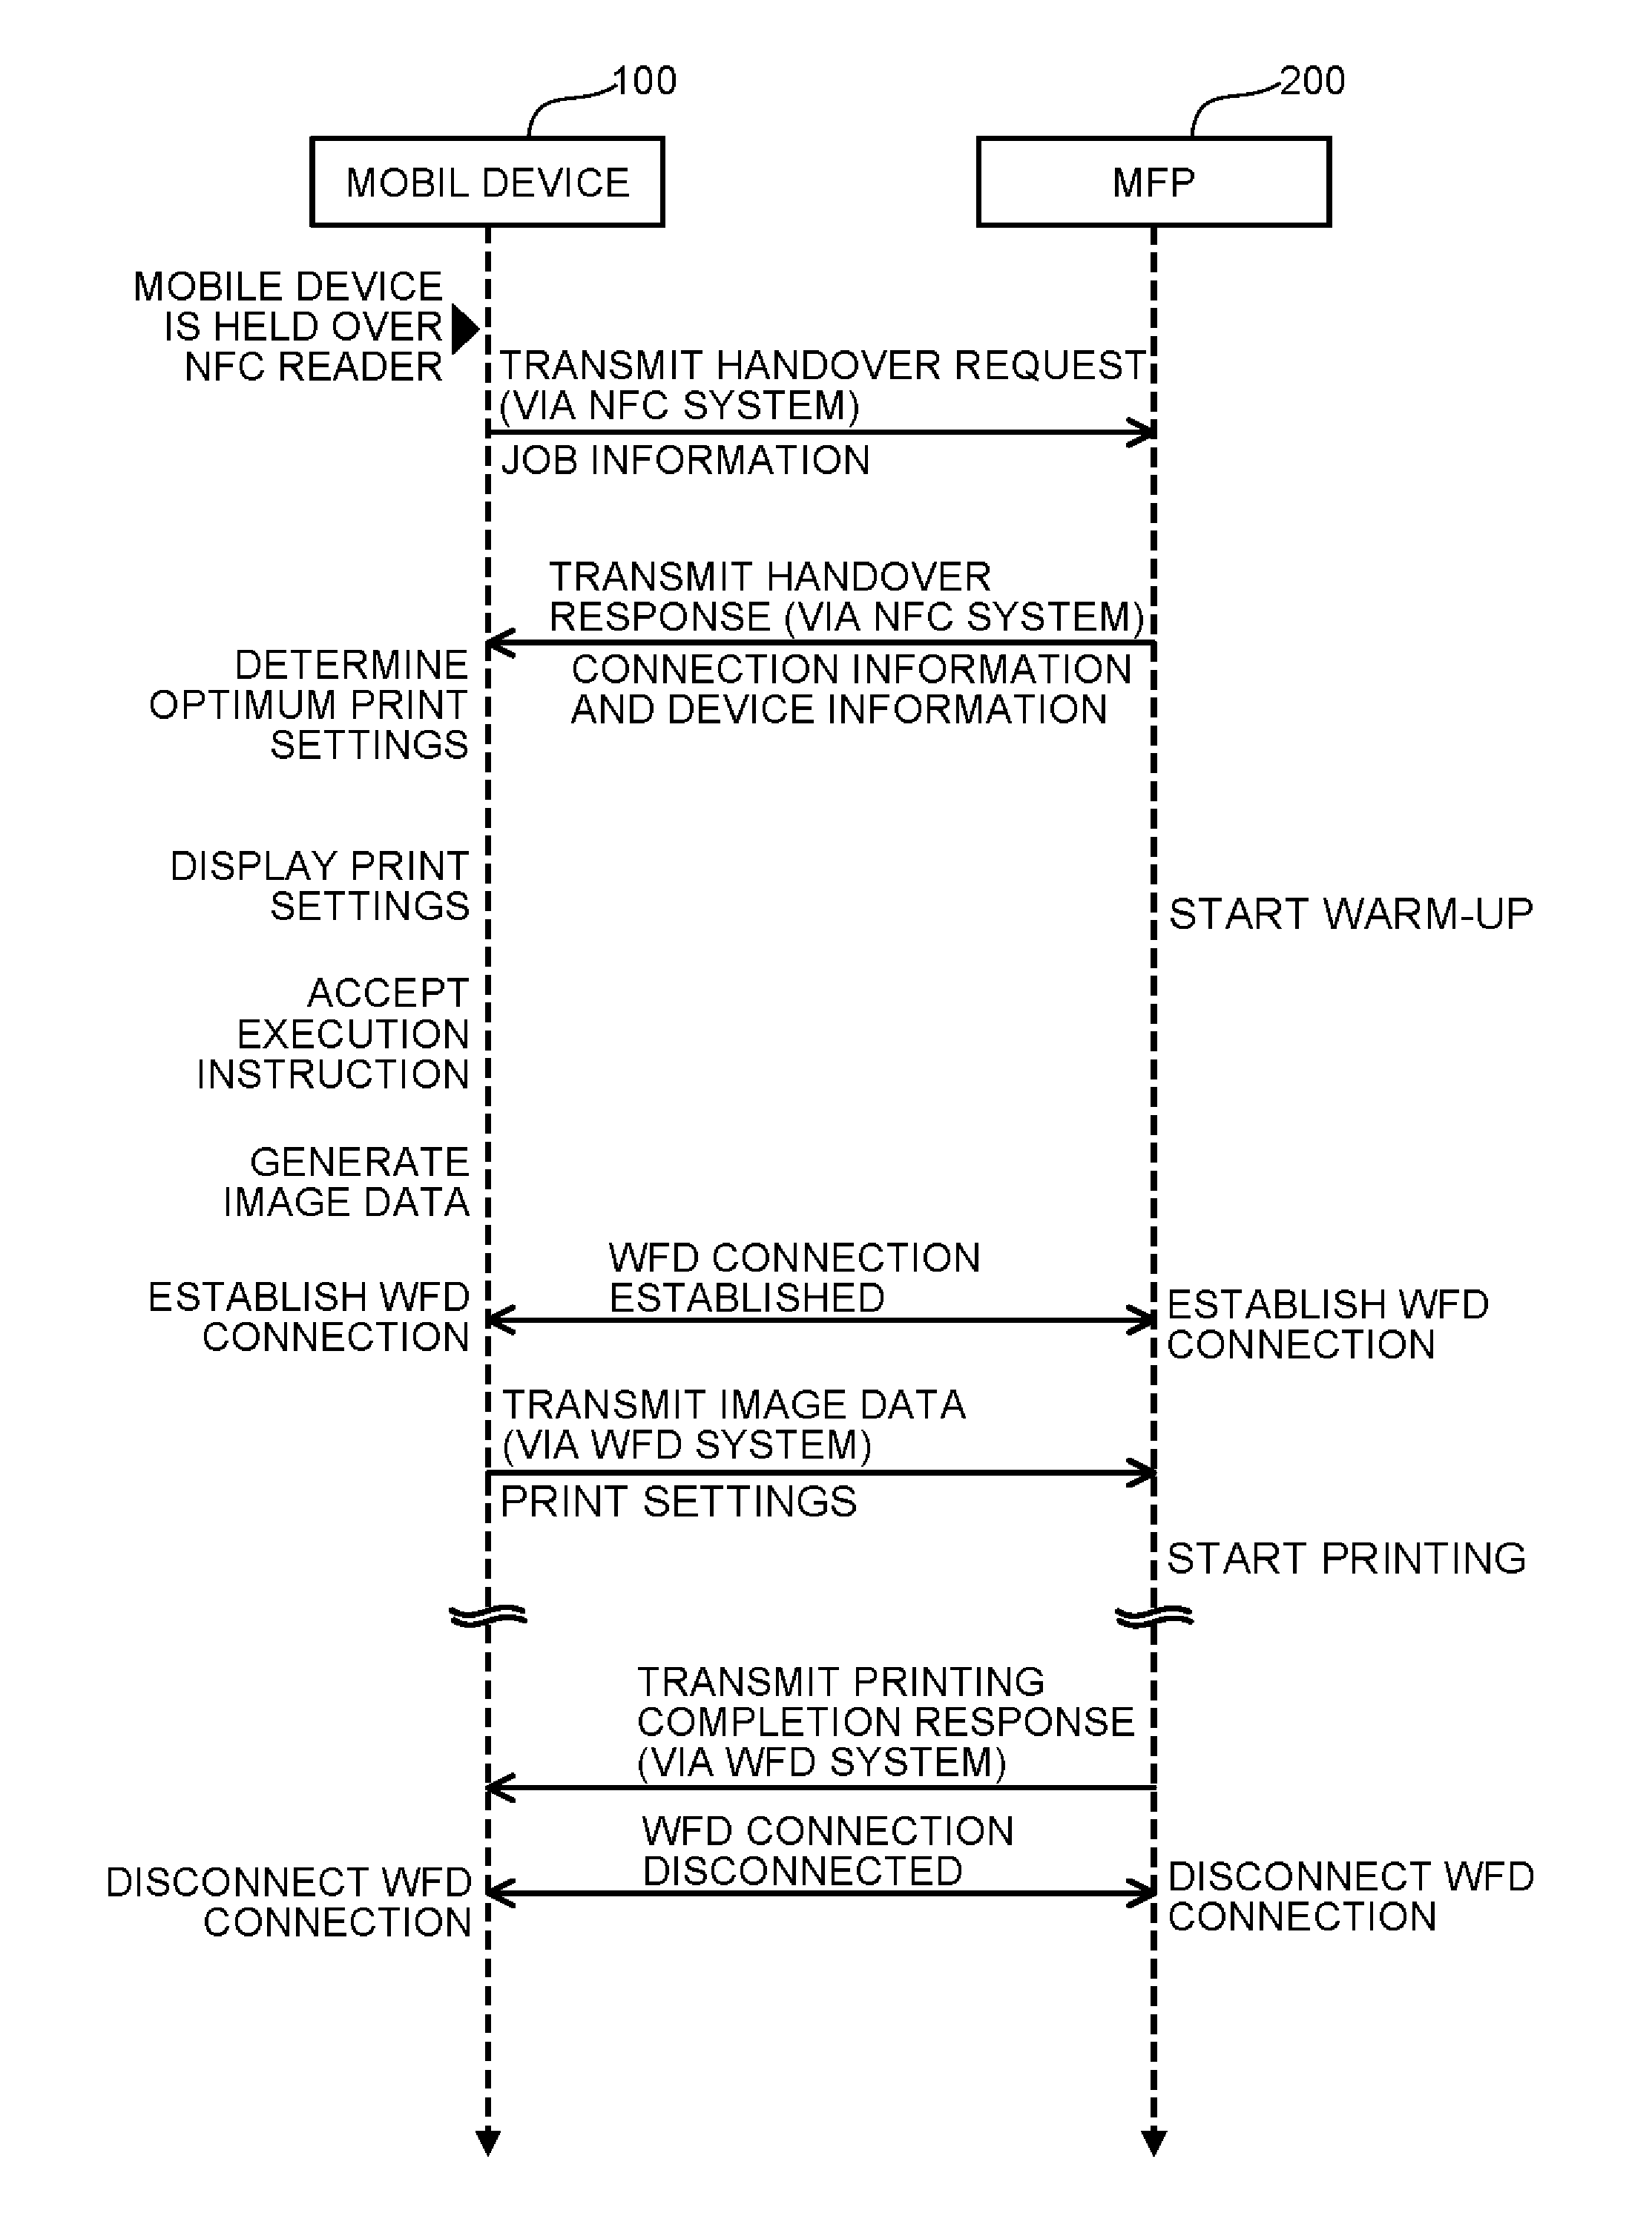 Image processing systems that perform communication using at least two communication protocols, data processing apparatuses that perform communication using at least two communication protocols, and computer-readable media storing instructions for such data processing apparatuses